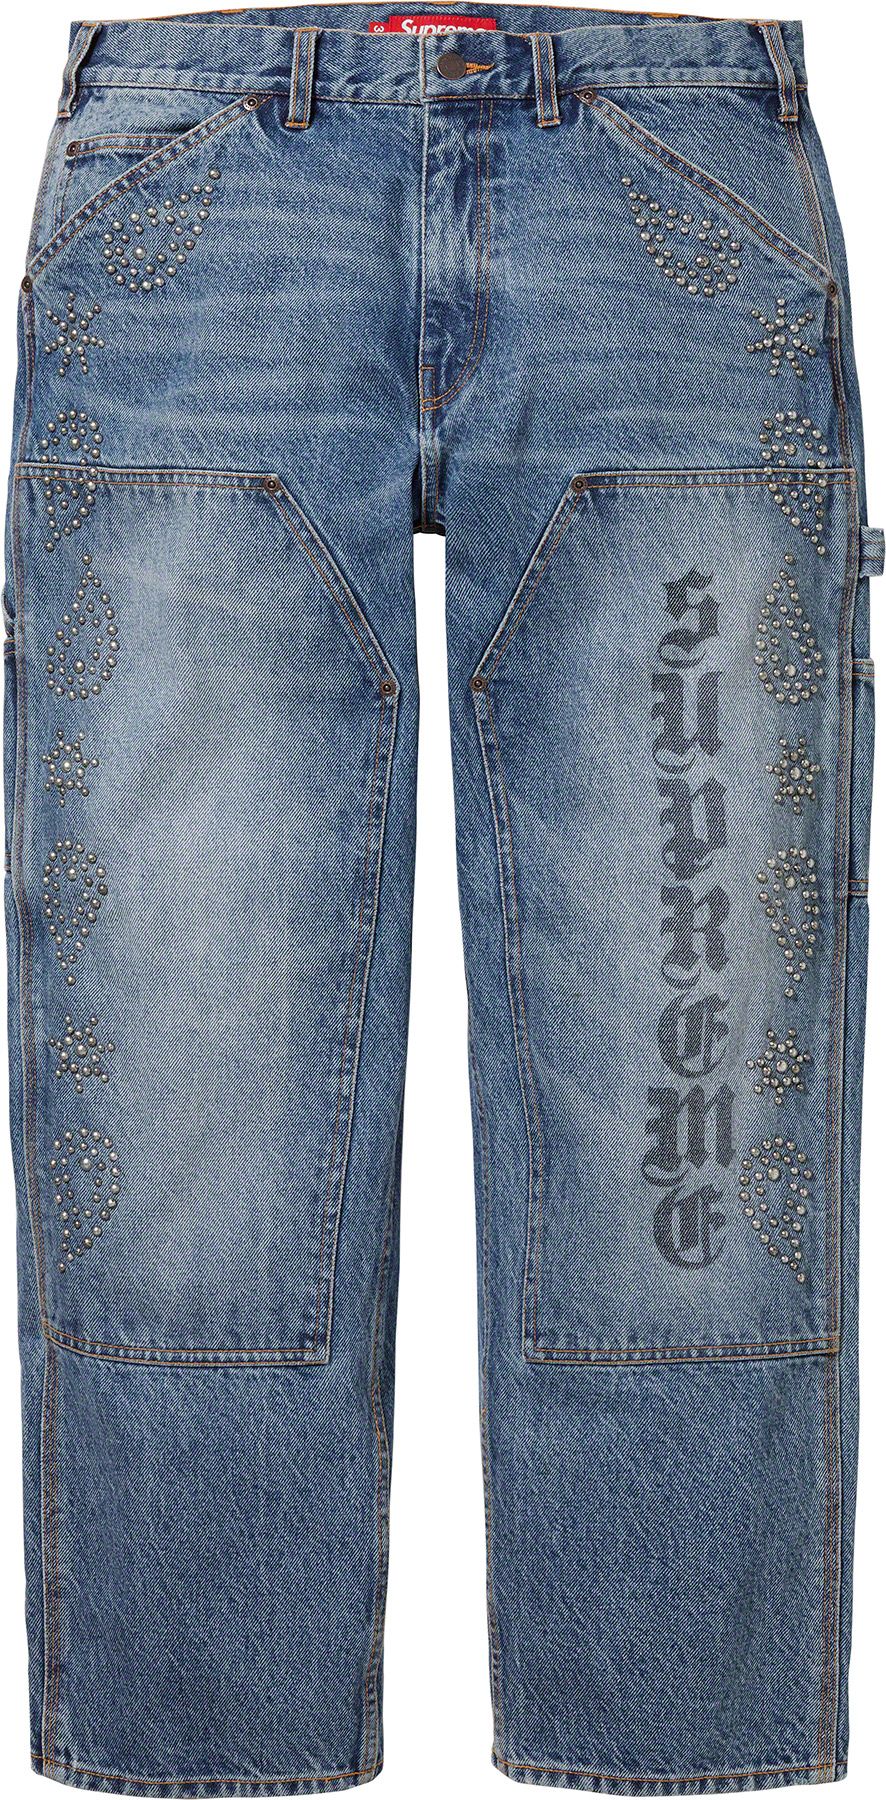 supreme-23fw-23aw-paisley-studded-double-knee-painter-pant